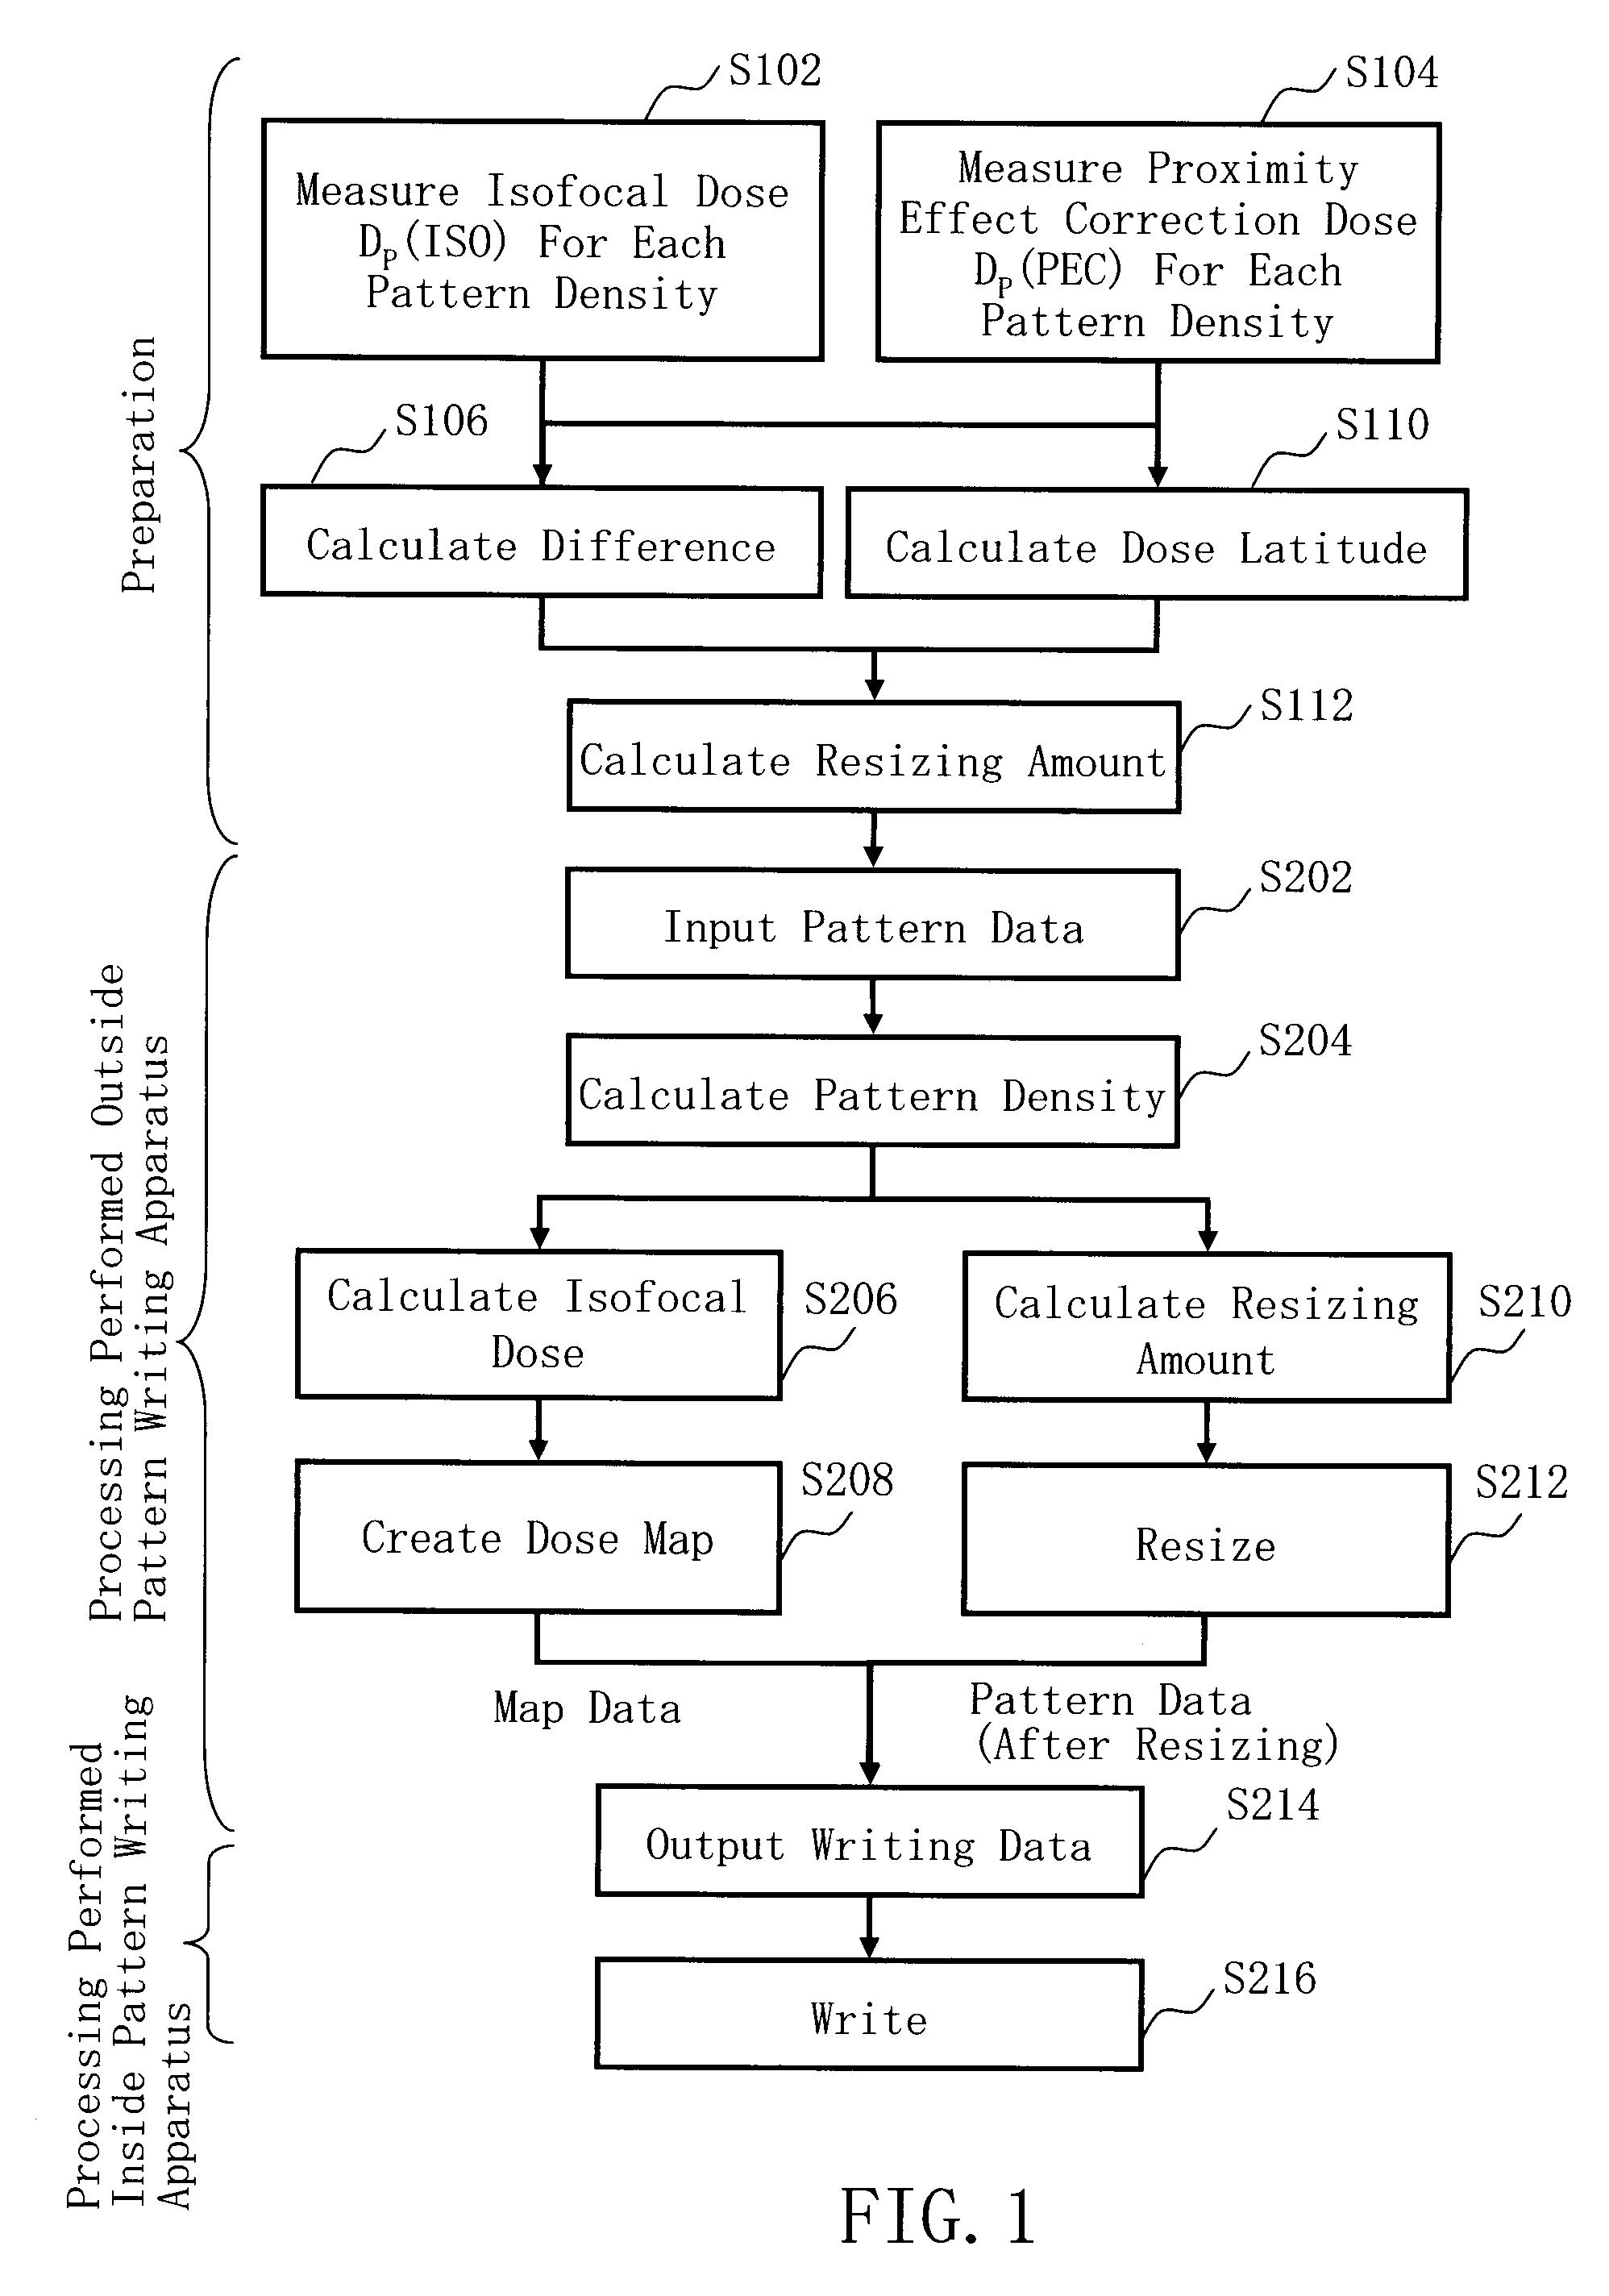 Writing method of charged particle beam, support apparatus of charged particle beam writing apparatus, writing data generating method and program-recorded readable recording medium